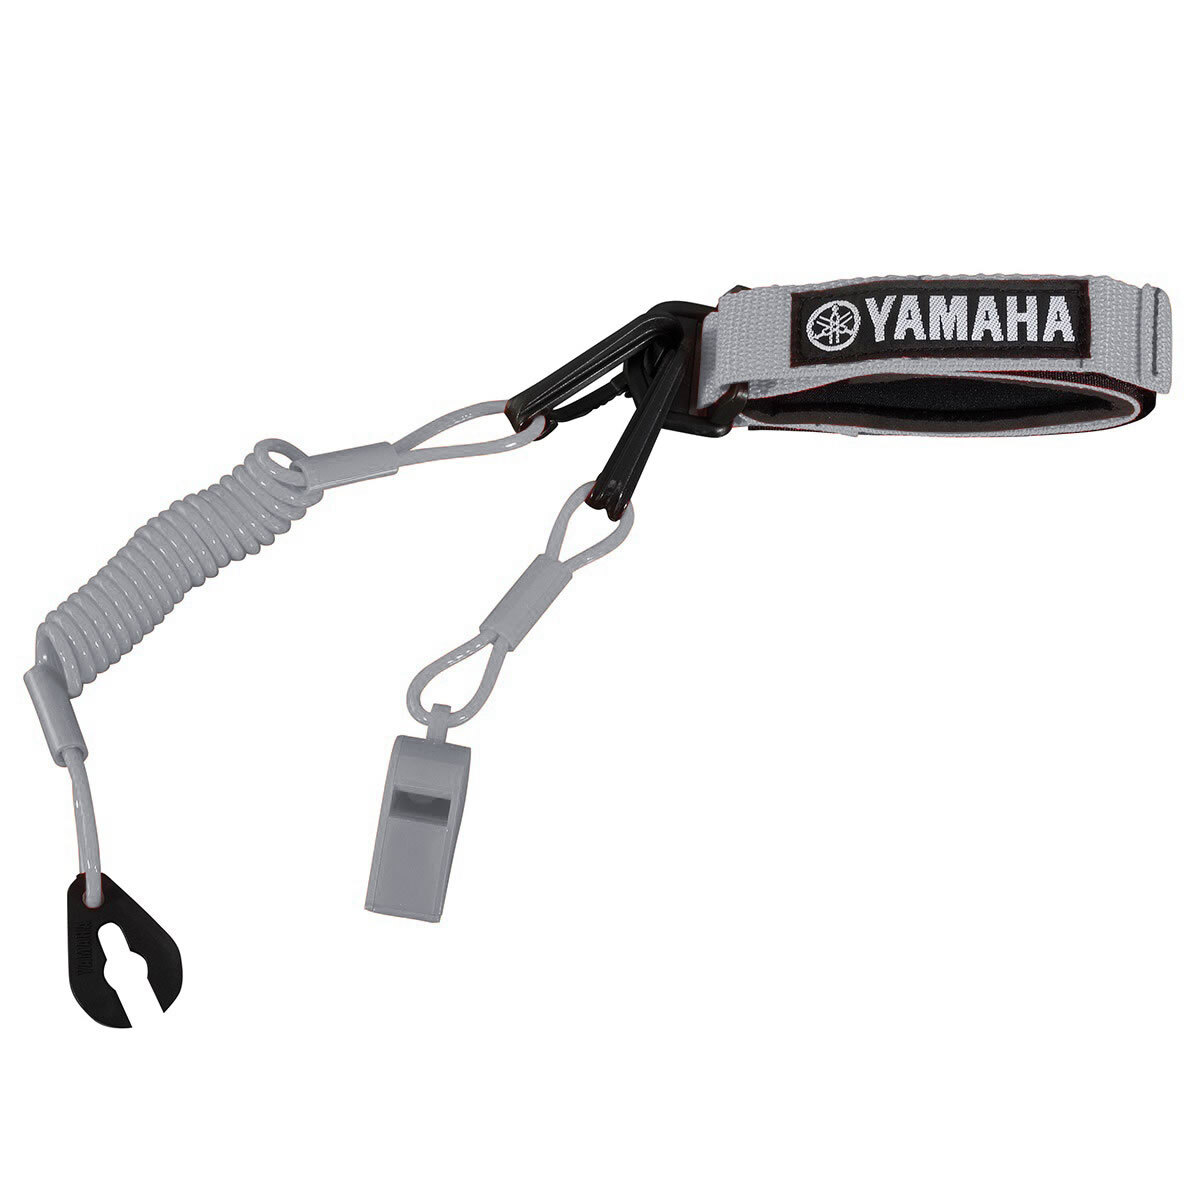 Pro Lanyard with Whistle